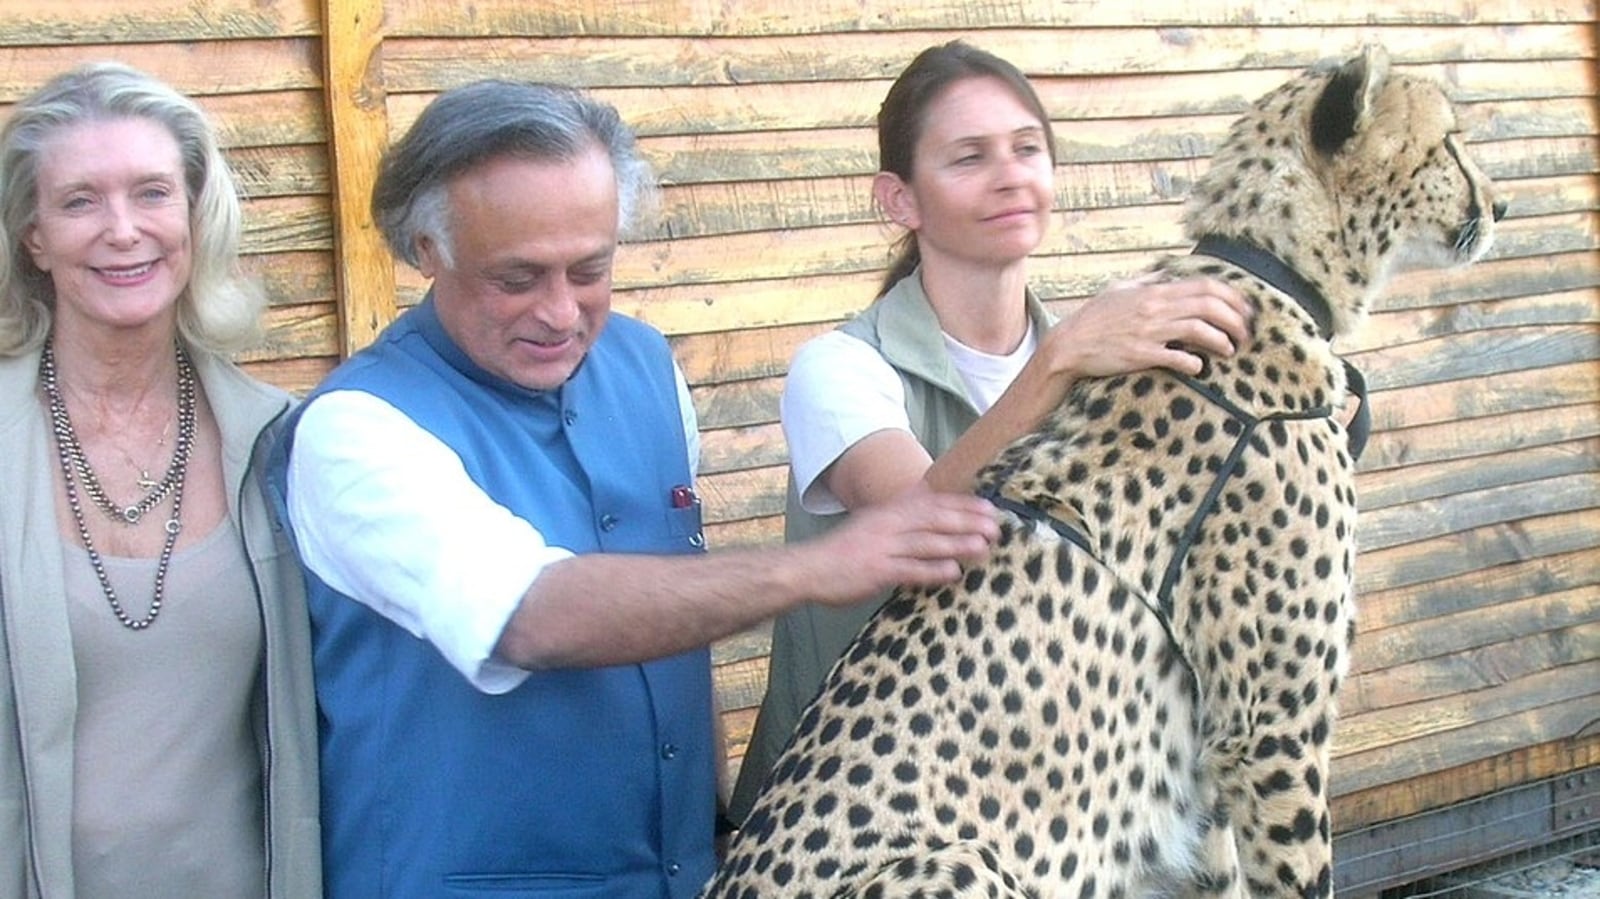 ‘Project Cheetah’ today made possible because… Congress on Gwalior